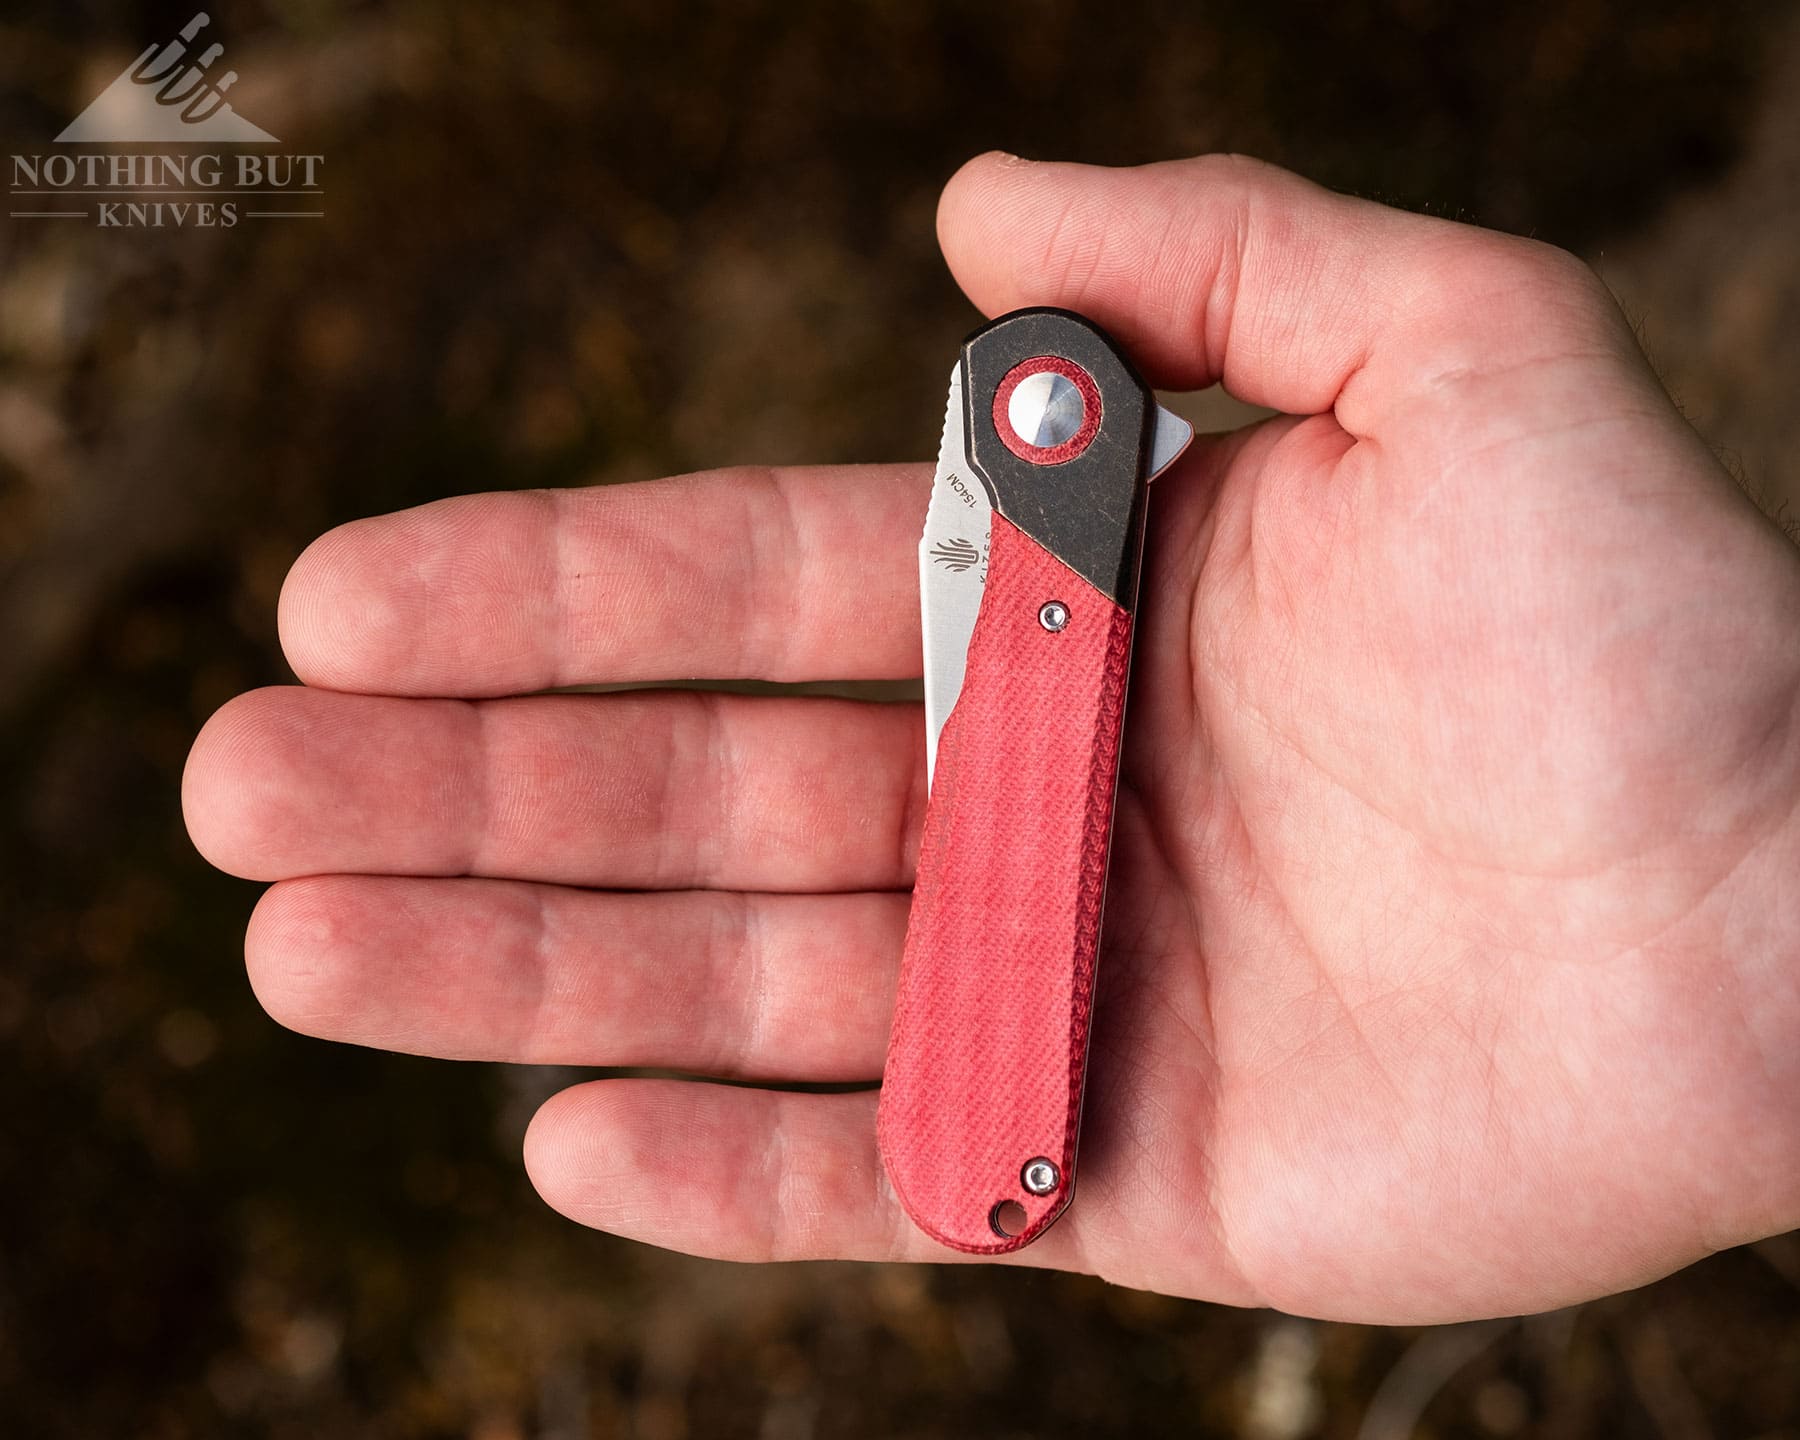 The Kizer Comet with red scales sits closed in a hand.